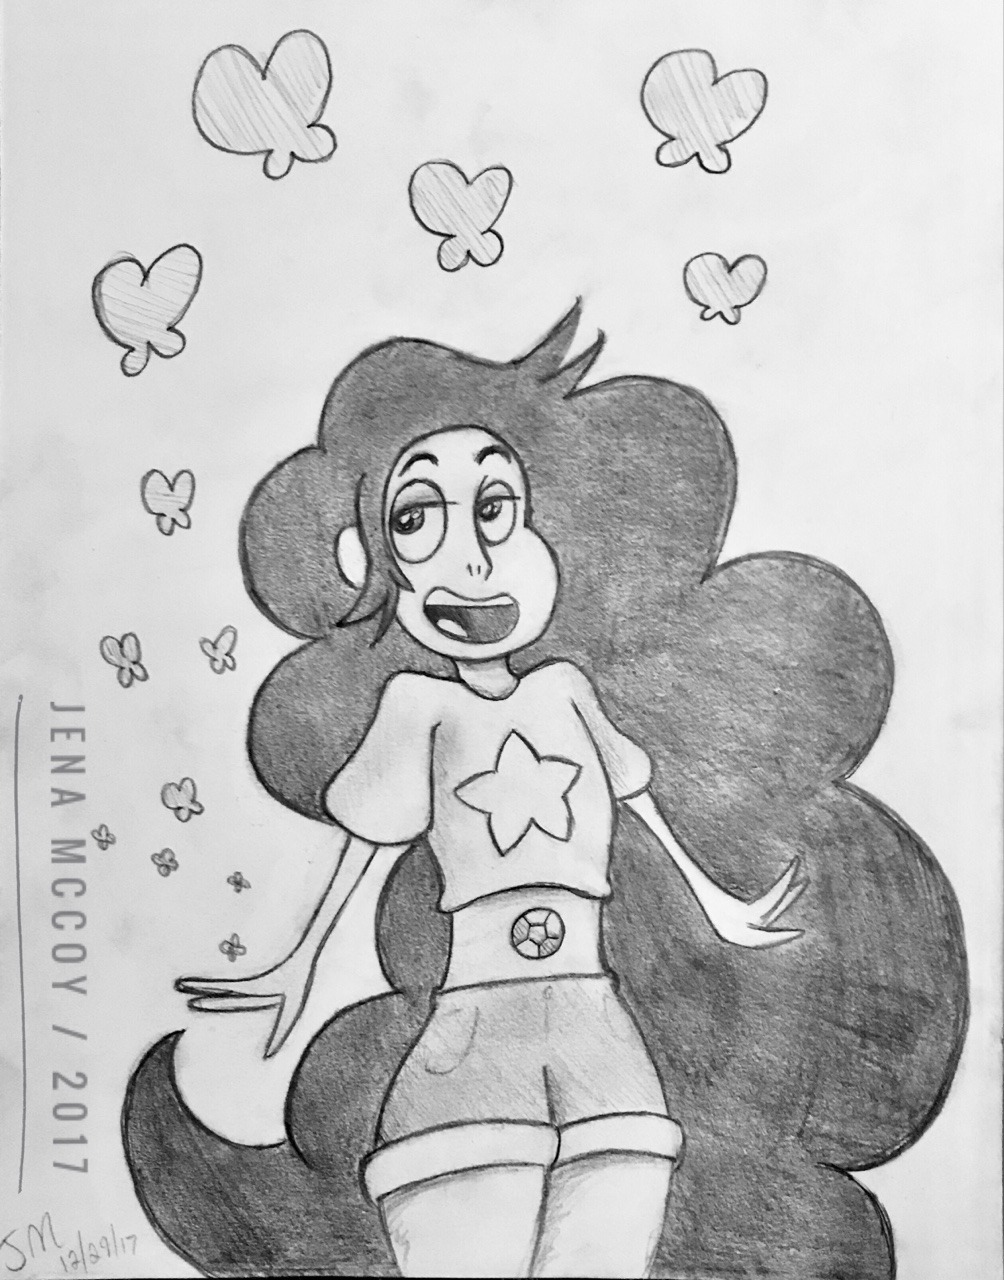 Have a break from my Disney doodles, and enjoy some happy Stevonnie!